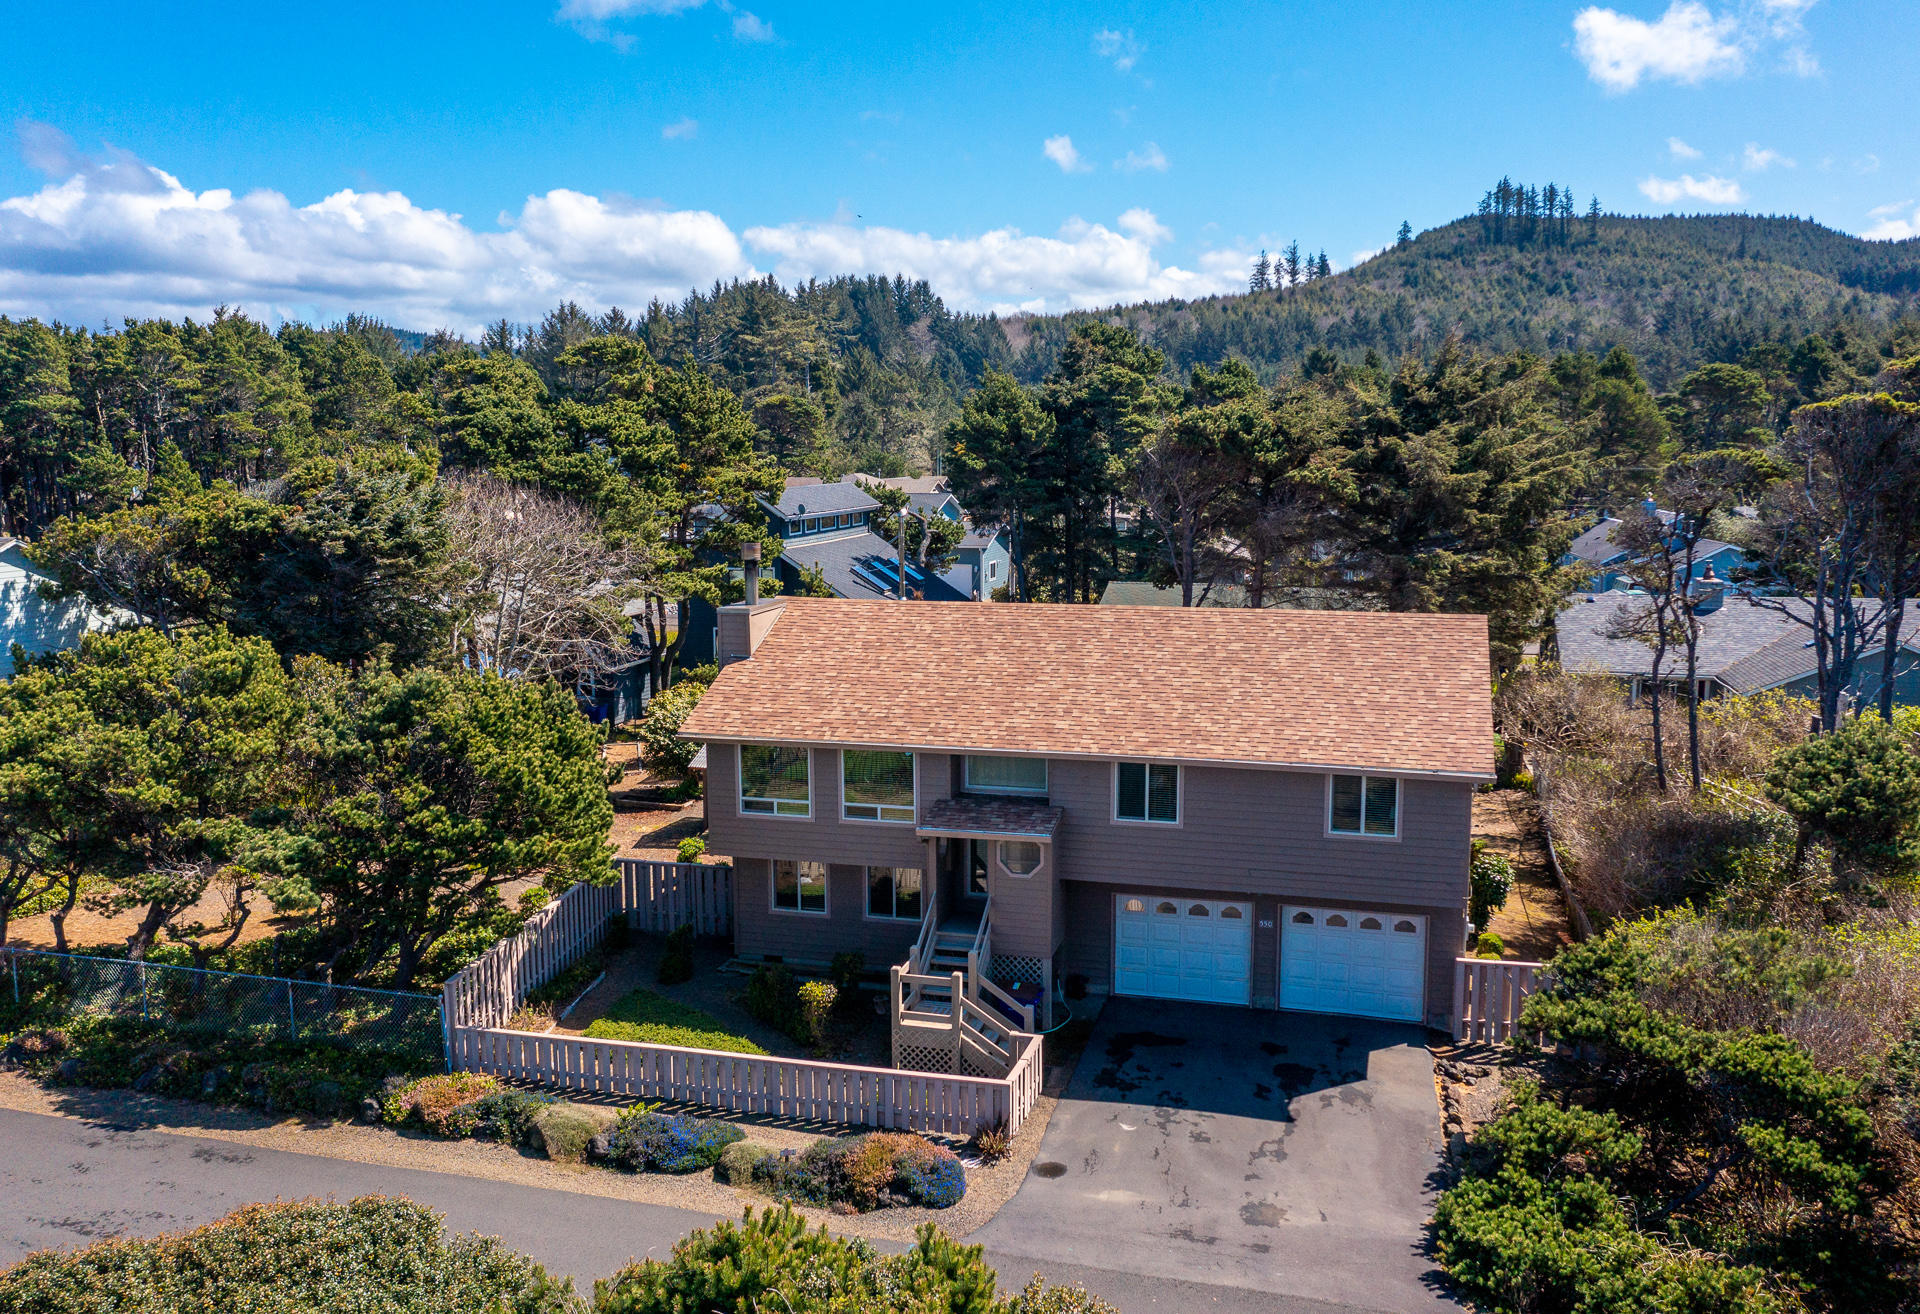 550 SW Point Ave Depoe Bay, Gleneden Beach, Lincoln City, Newport, Otis, Rose Lodge, Seal Rock, Waldport, Yachats, To Home Listings - Amy Plechaty, Emerald Coast Realty Real Estate, homes for sale, property for sale